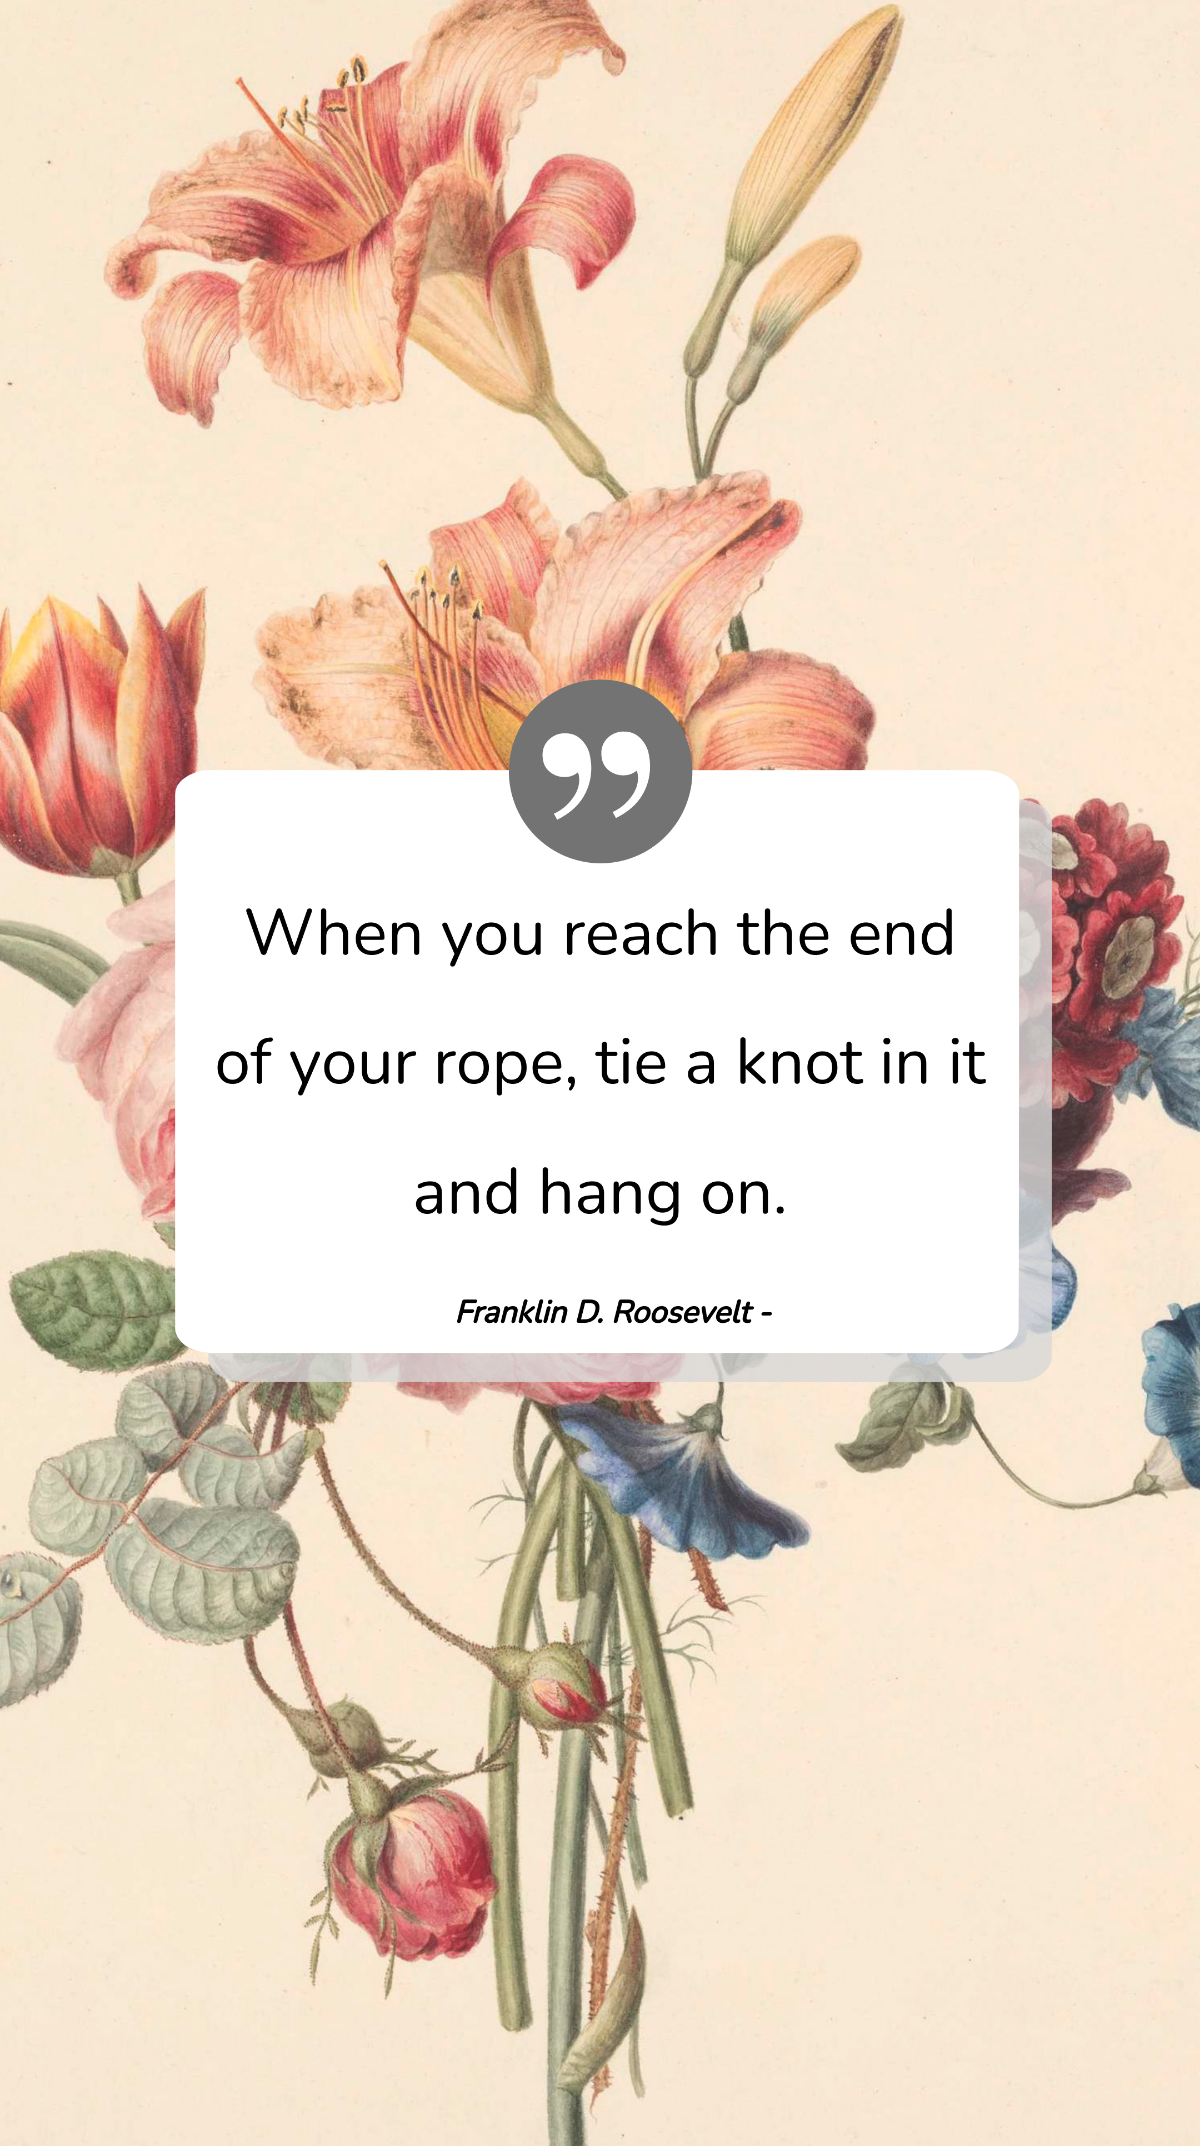 Franklin D. Roosevelt - When you reach the end of your rope, tie a knot in it and hang on.